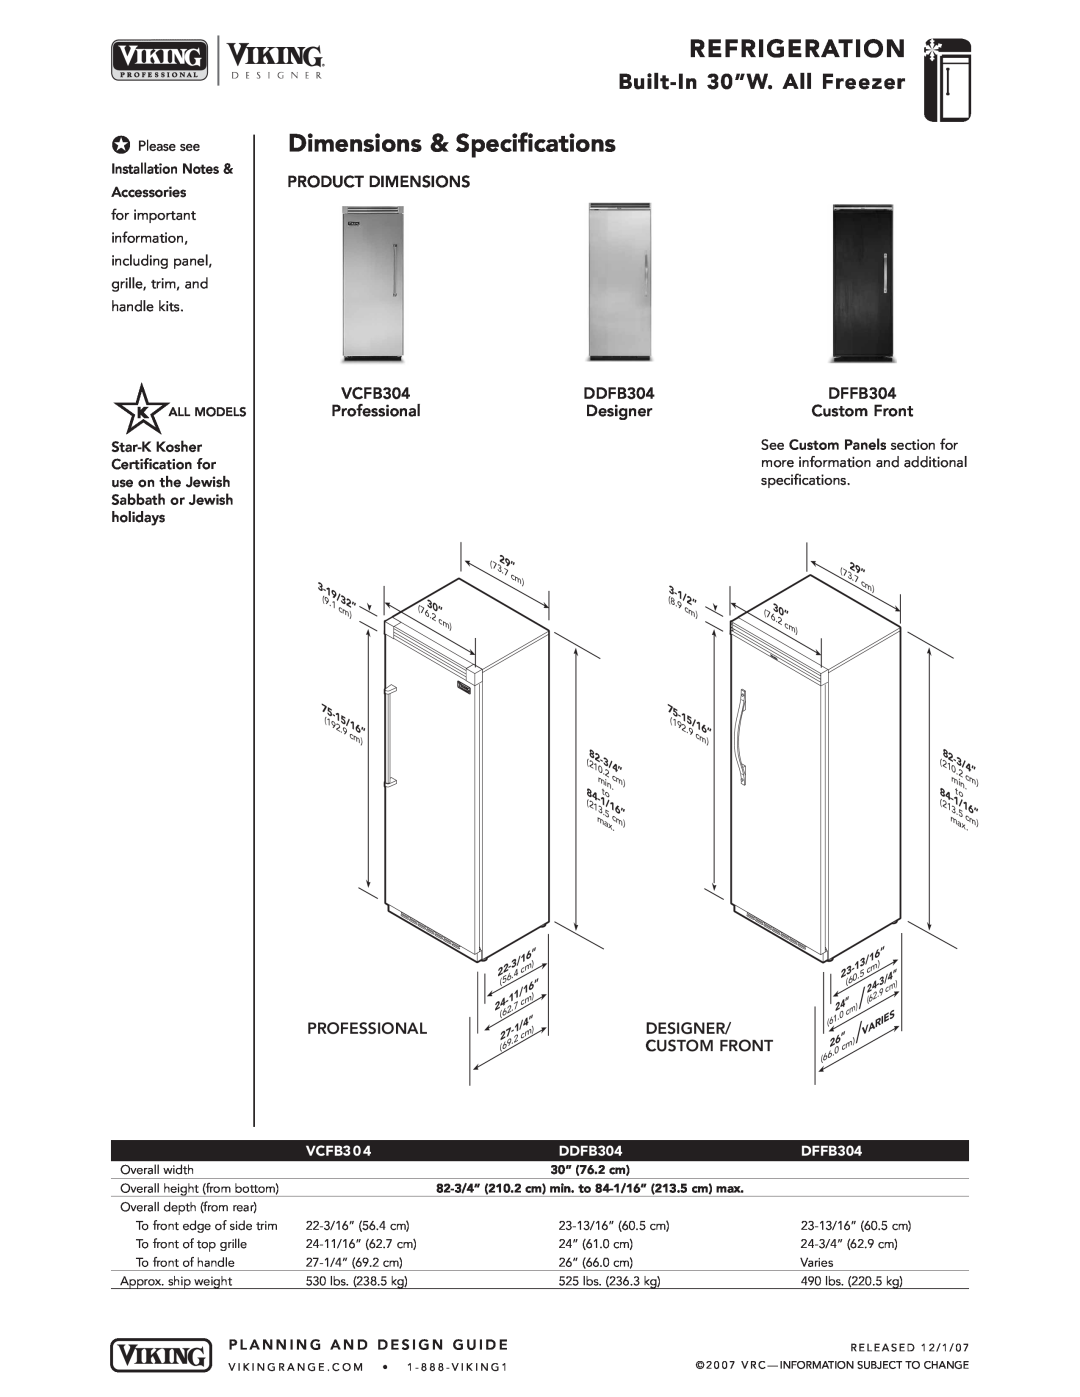 Viking VCFB, DFFB Dimensions & Specifications, Product Dimensions, 15/16”9, 1/16”5, Professional, Designer, Custom Front 